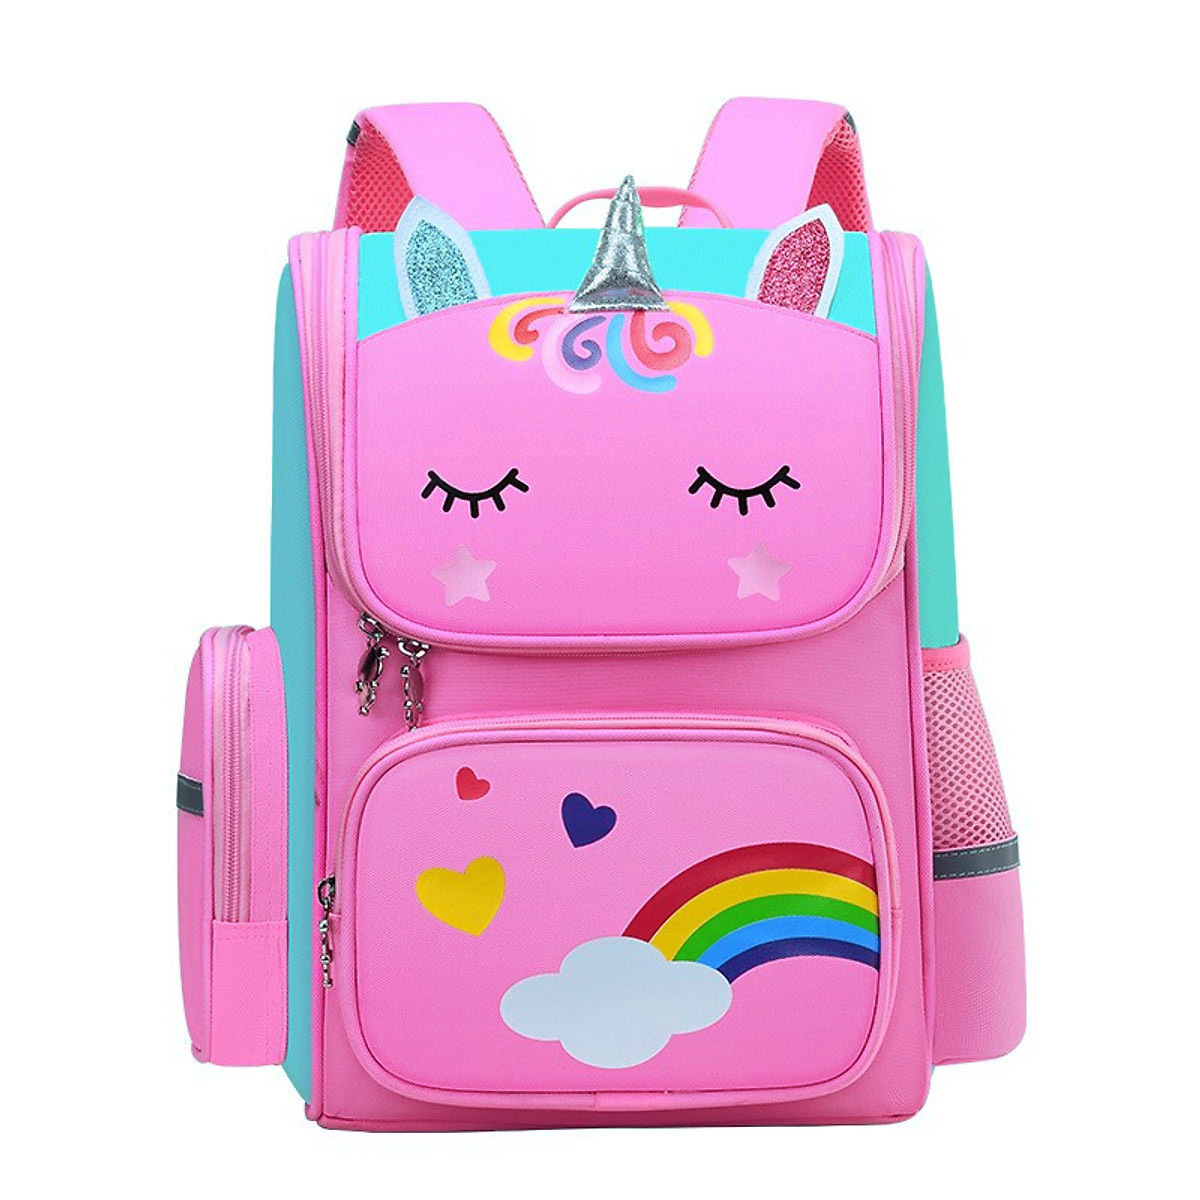 New Design Cute Unicorn Girls Child Kids School Bags Backpack With ...